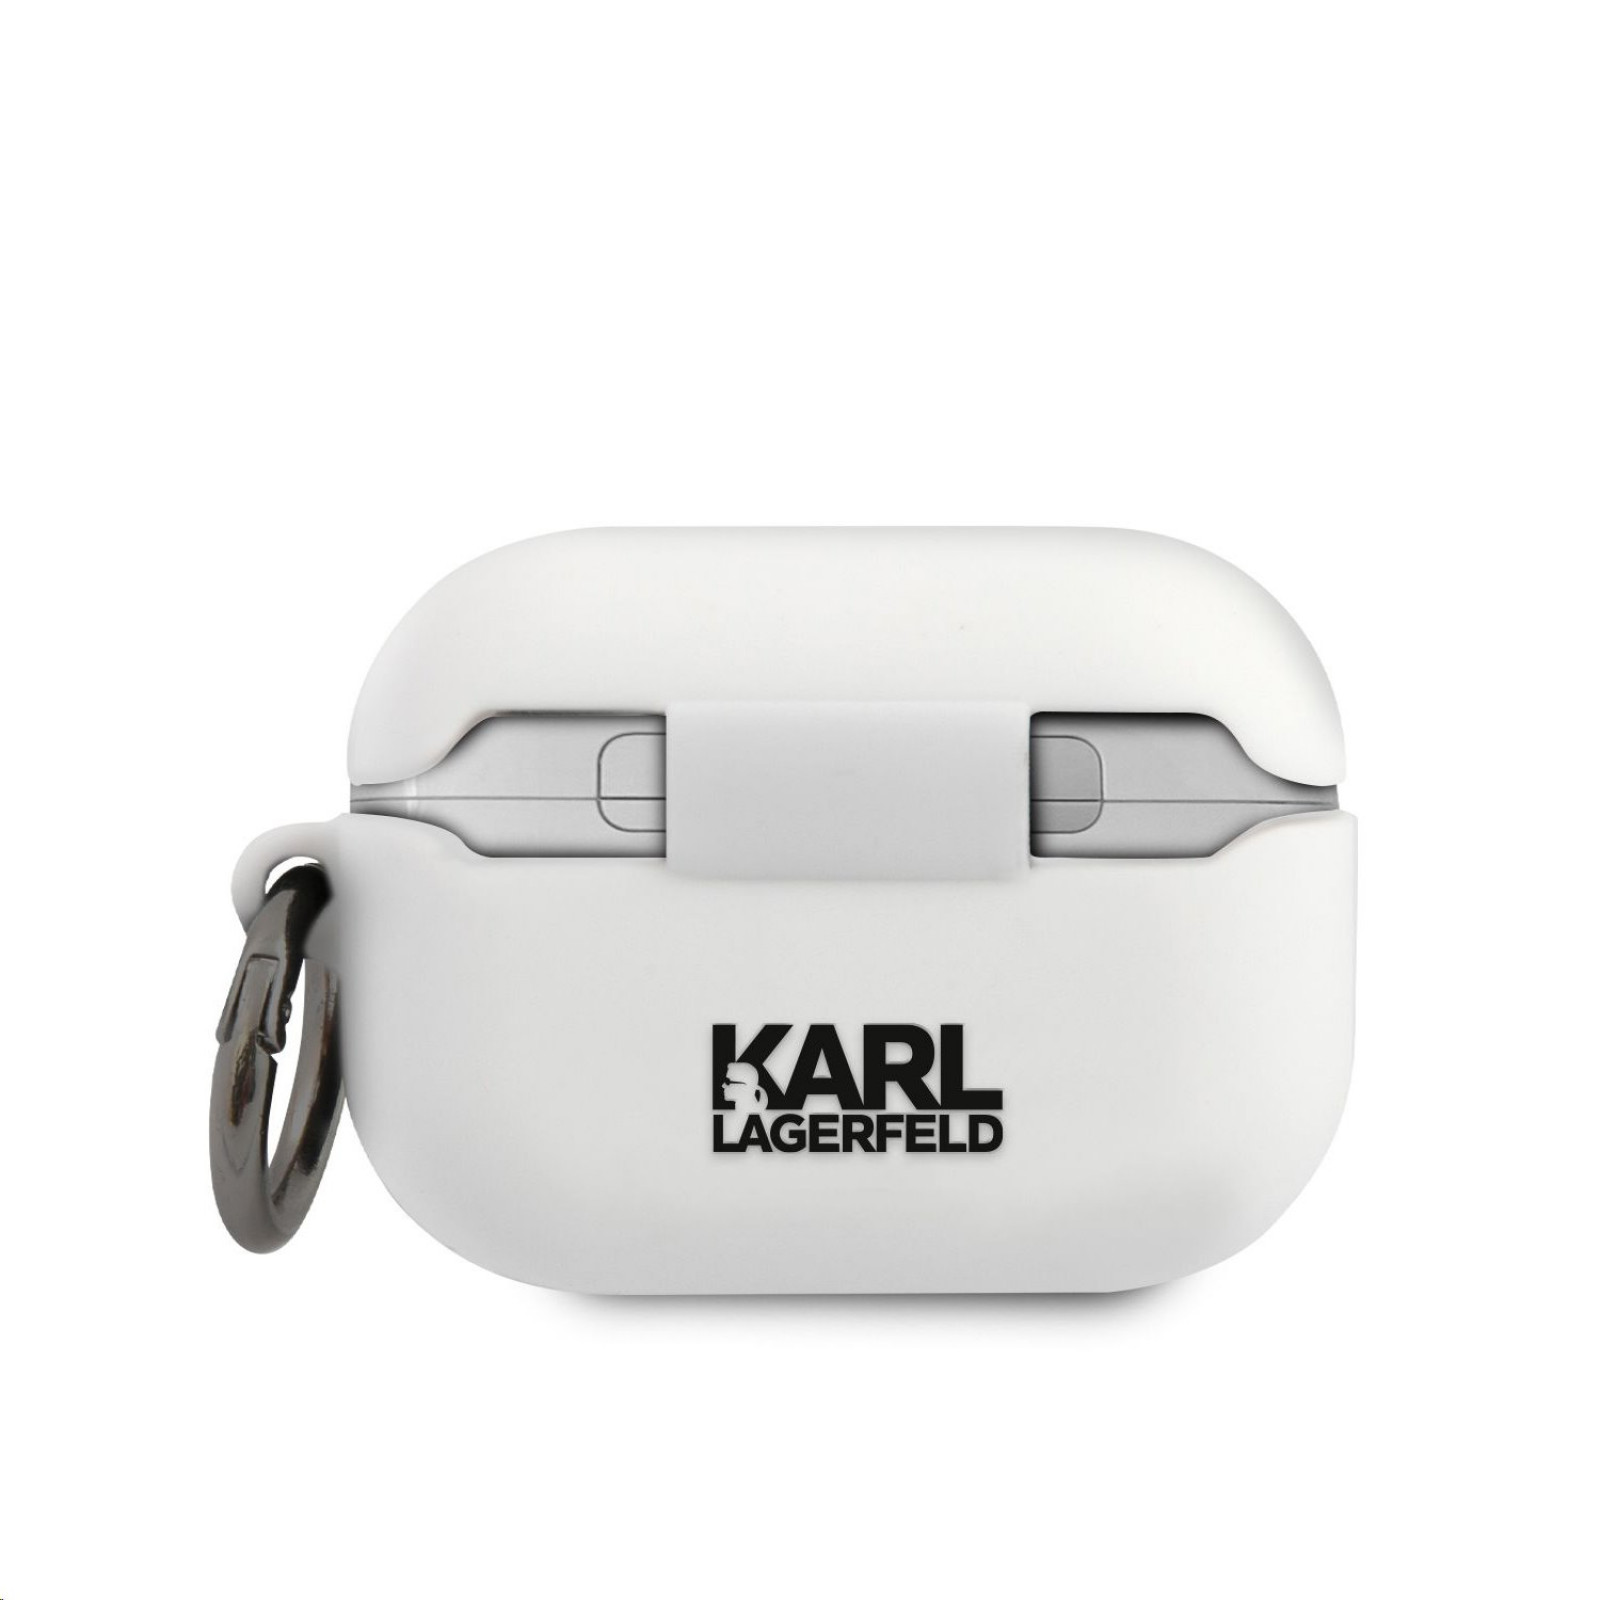 Калъф Karl Lagerfeld Rue St Guillaume Silicone Case за Airpods Pro - Бял